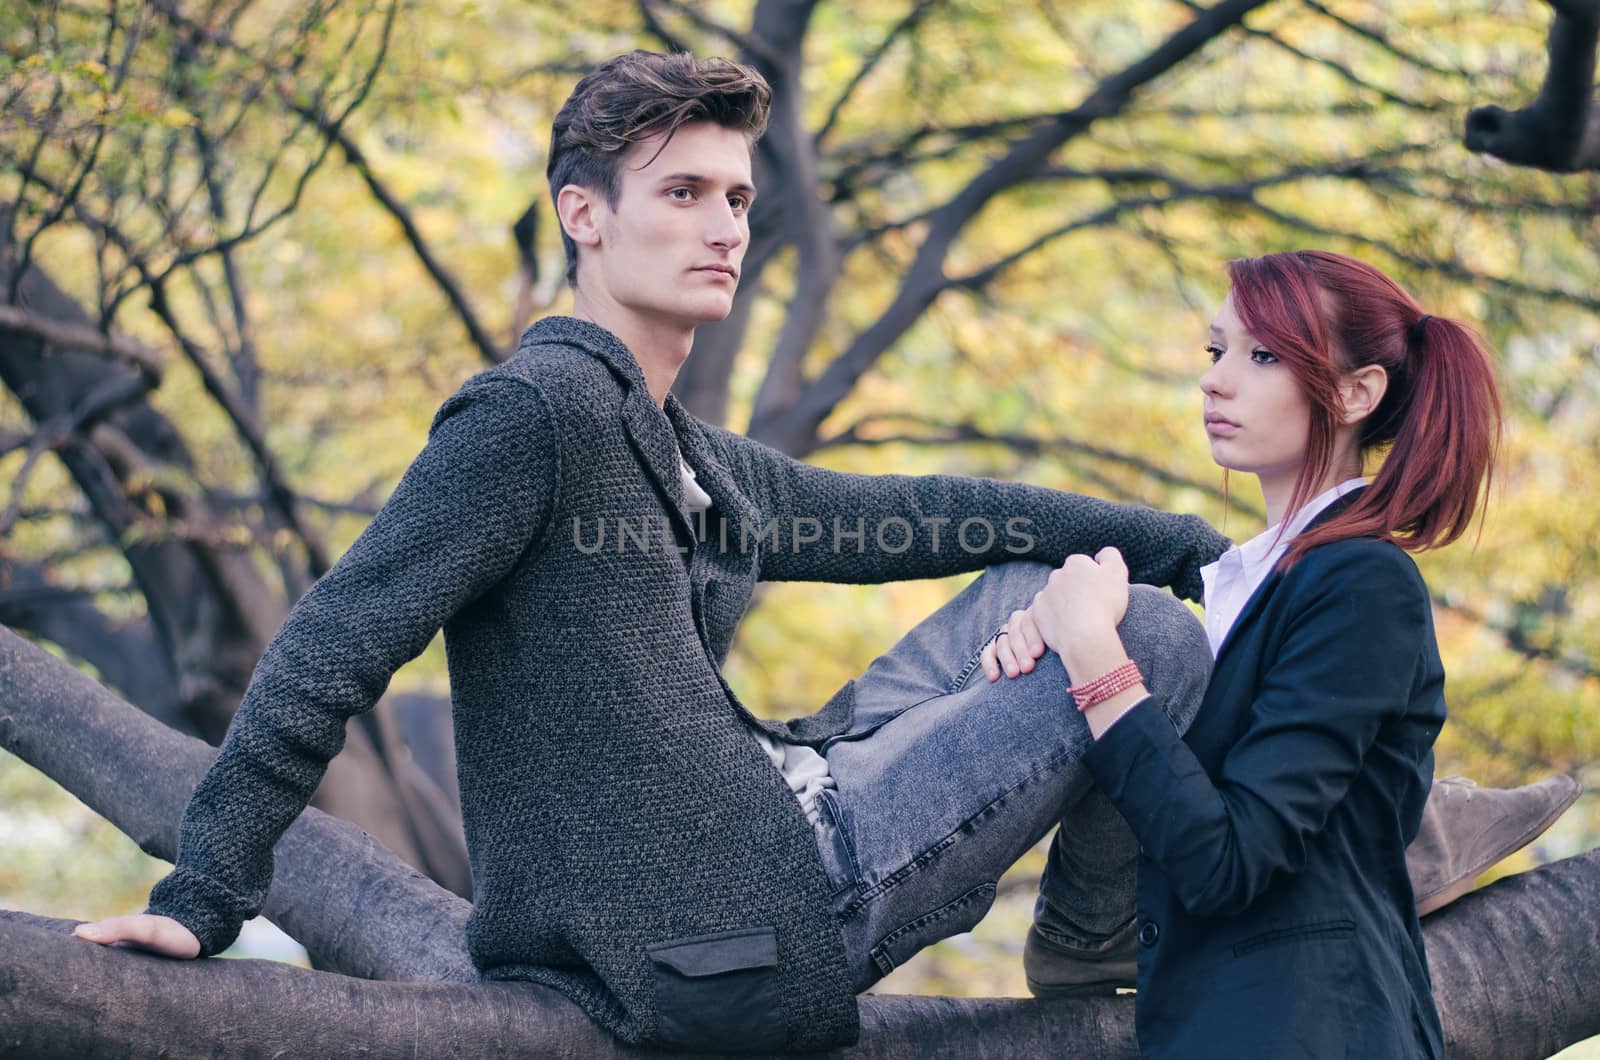 Young elegant couple, man sitting on big tree branch, girl next to him during fall